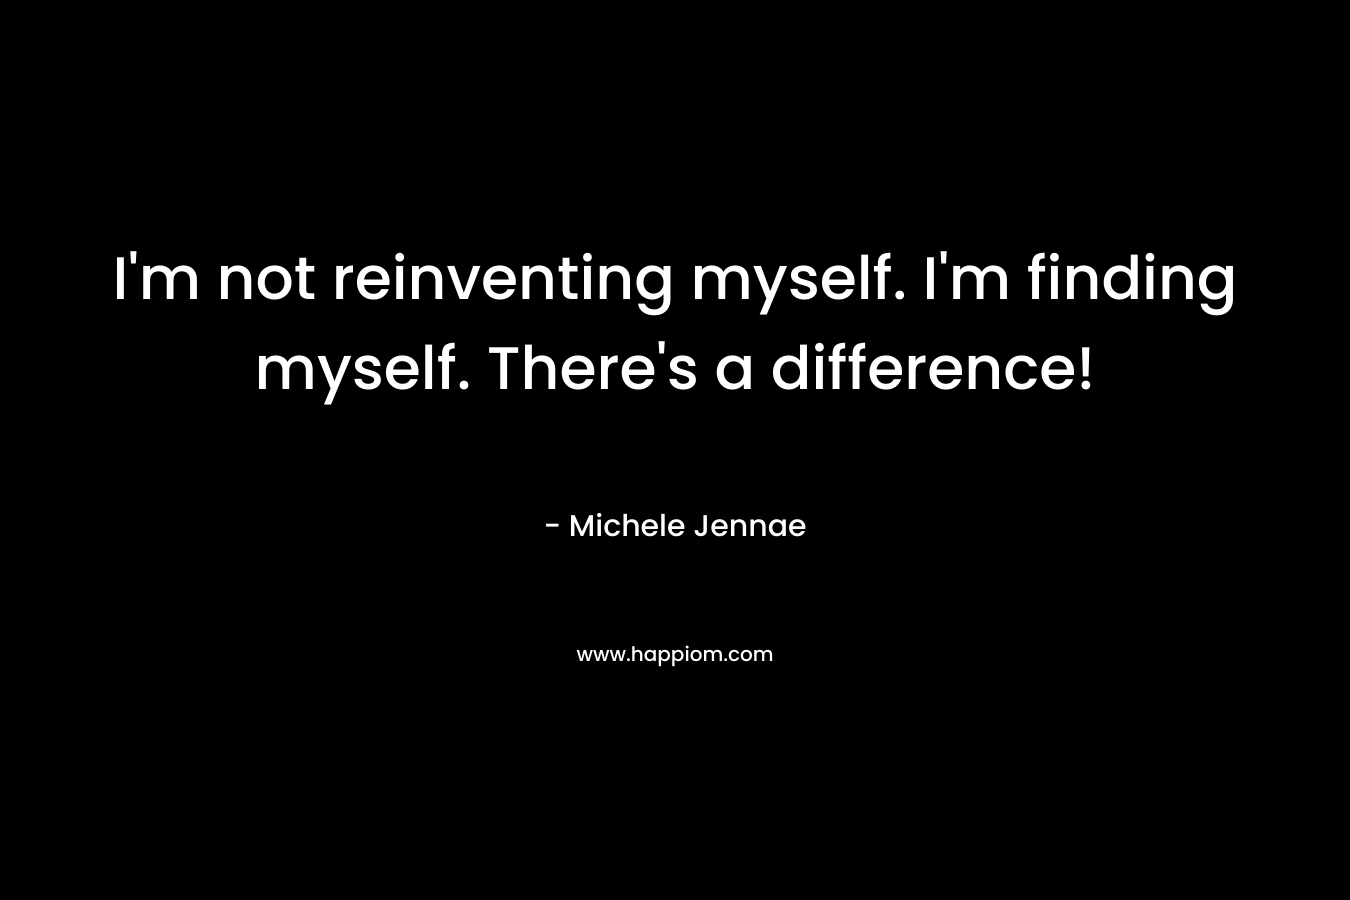 I'm not reinventing myself. I'm finding myself. There's a difference!